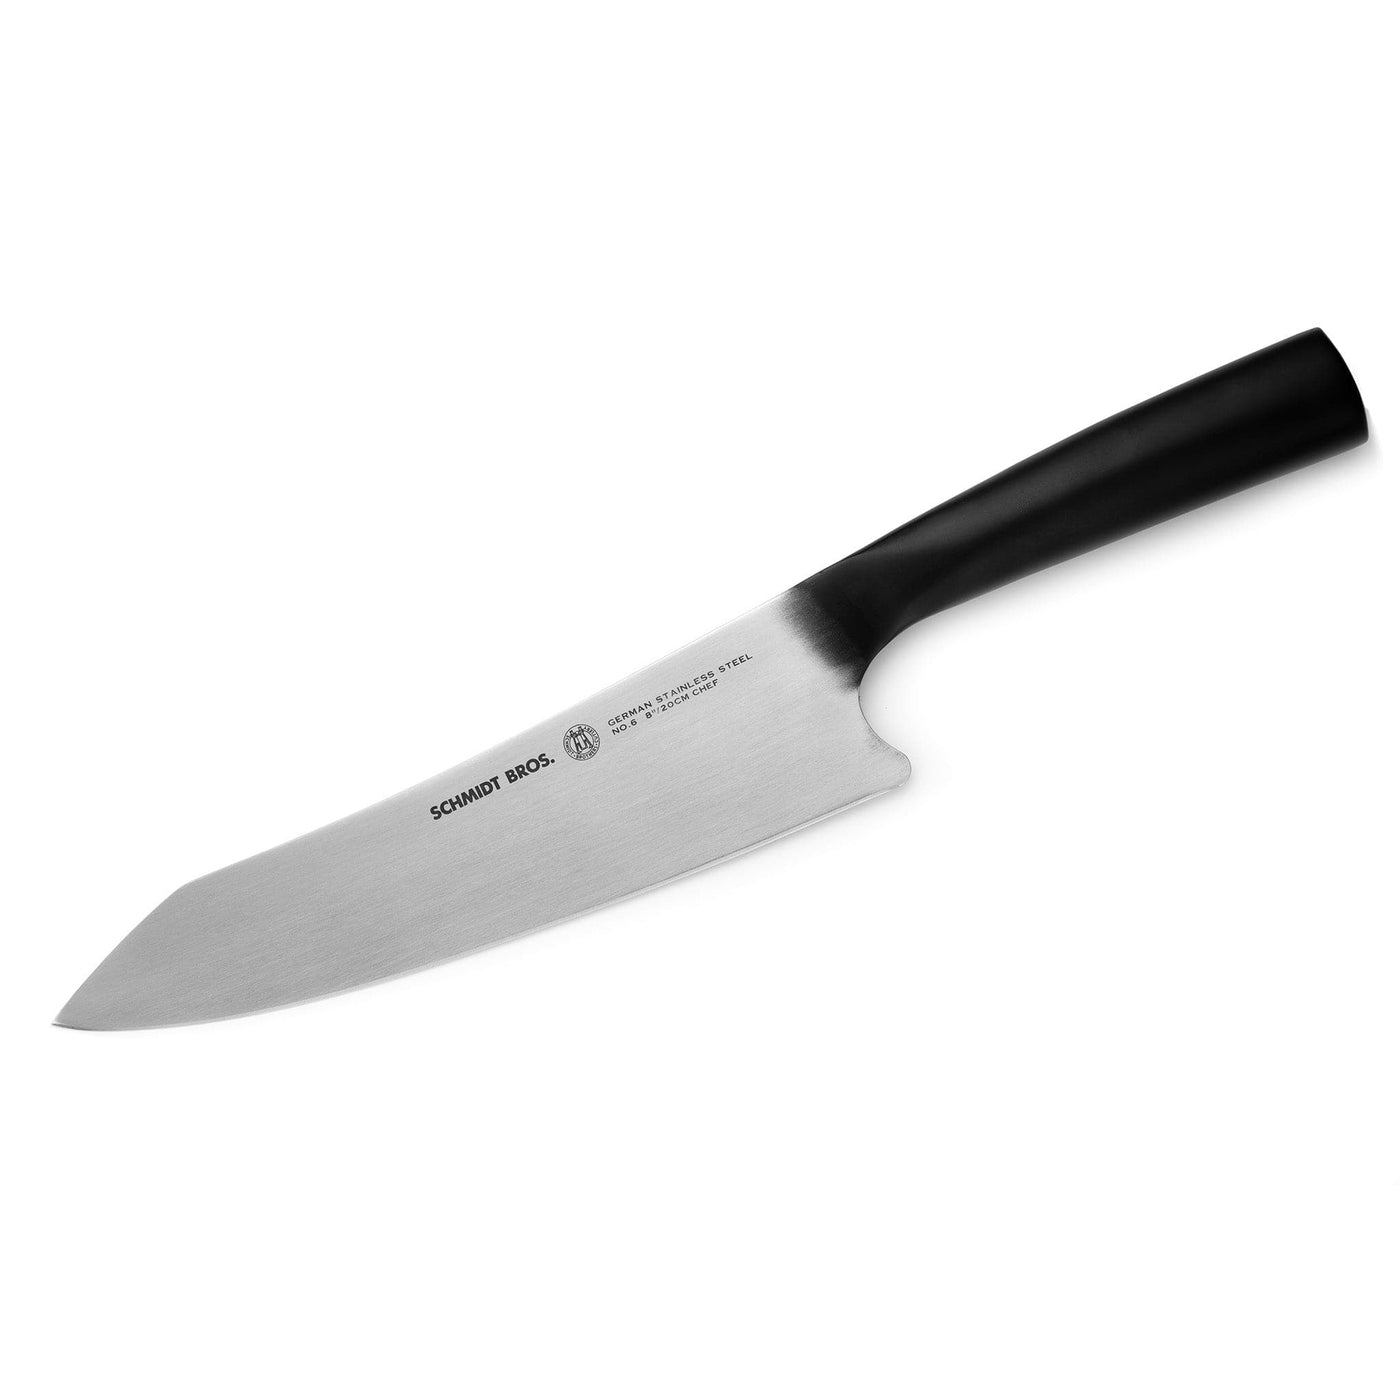 https://schmidtbrothers.com/cdn/shop/files/schmidt-brothers-kitchen-cutlery-schmidt-brothers-carbon-6-15-piece-knife-set-high-carbon-stainless-steel-cutlery-with-acacia-and-acrylic-magnetic-knife-block-and-knife-sharpener-3074_7e48b619-b5ca-4d0c-bdaa-5b5c281f94c2_1400x.jpg?v=1684150119